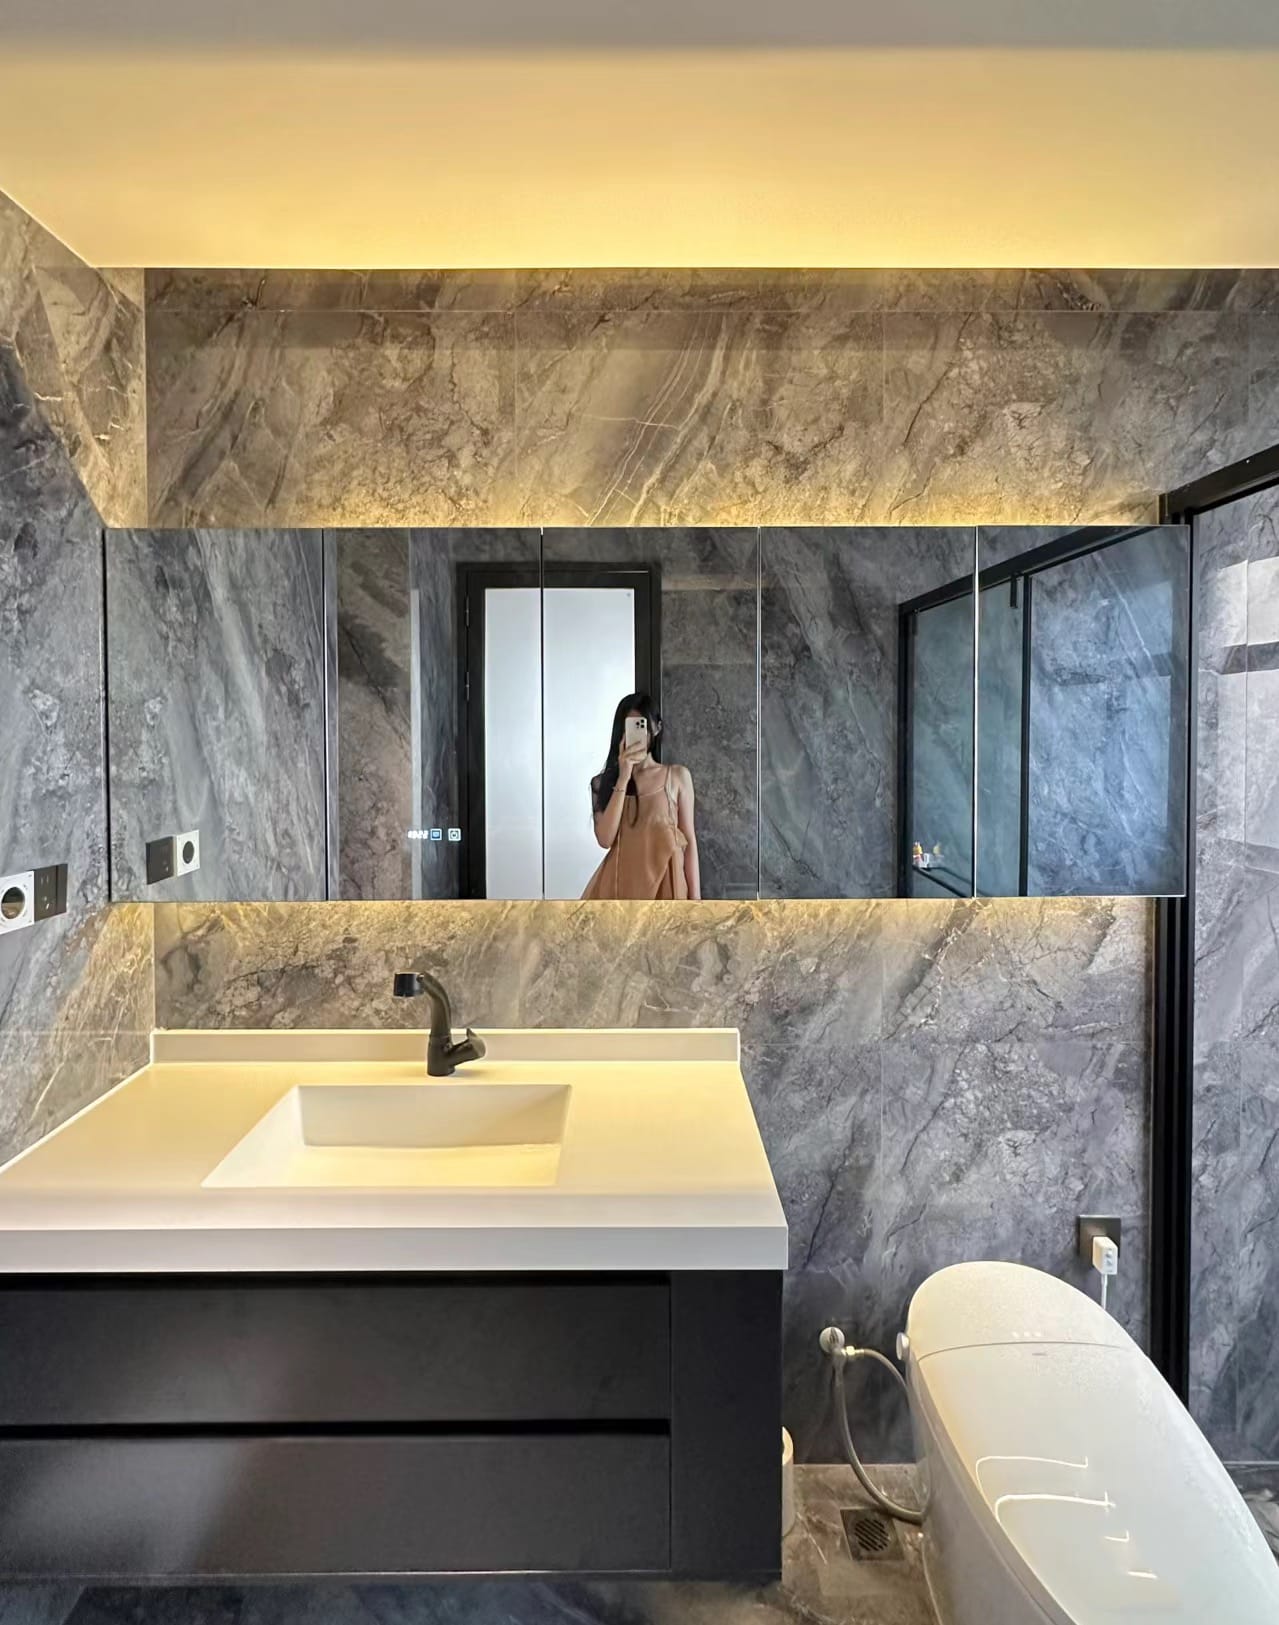 How to Choose Best Hotel Ceramic Tiles